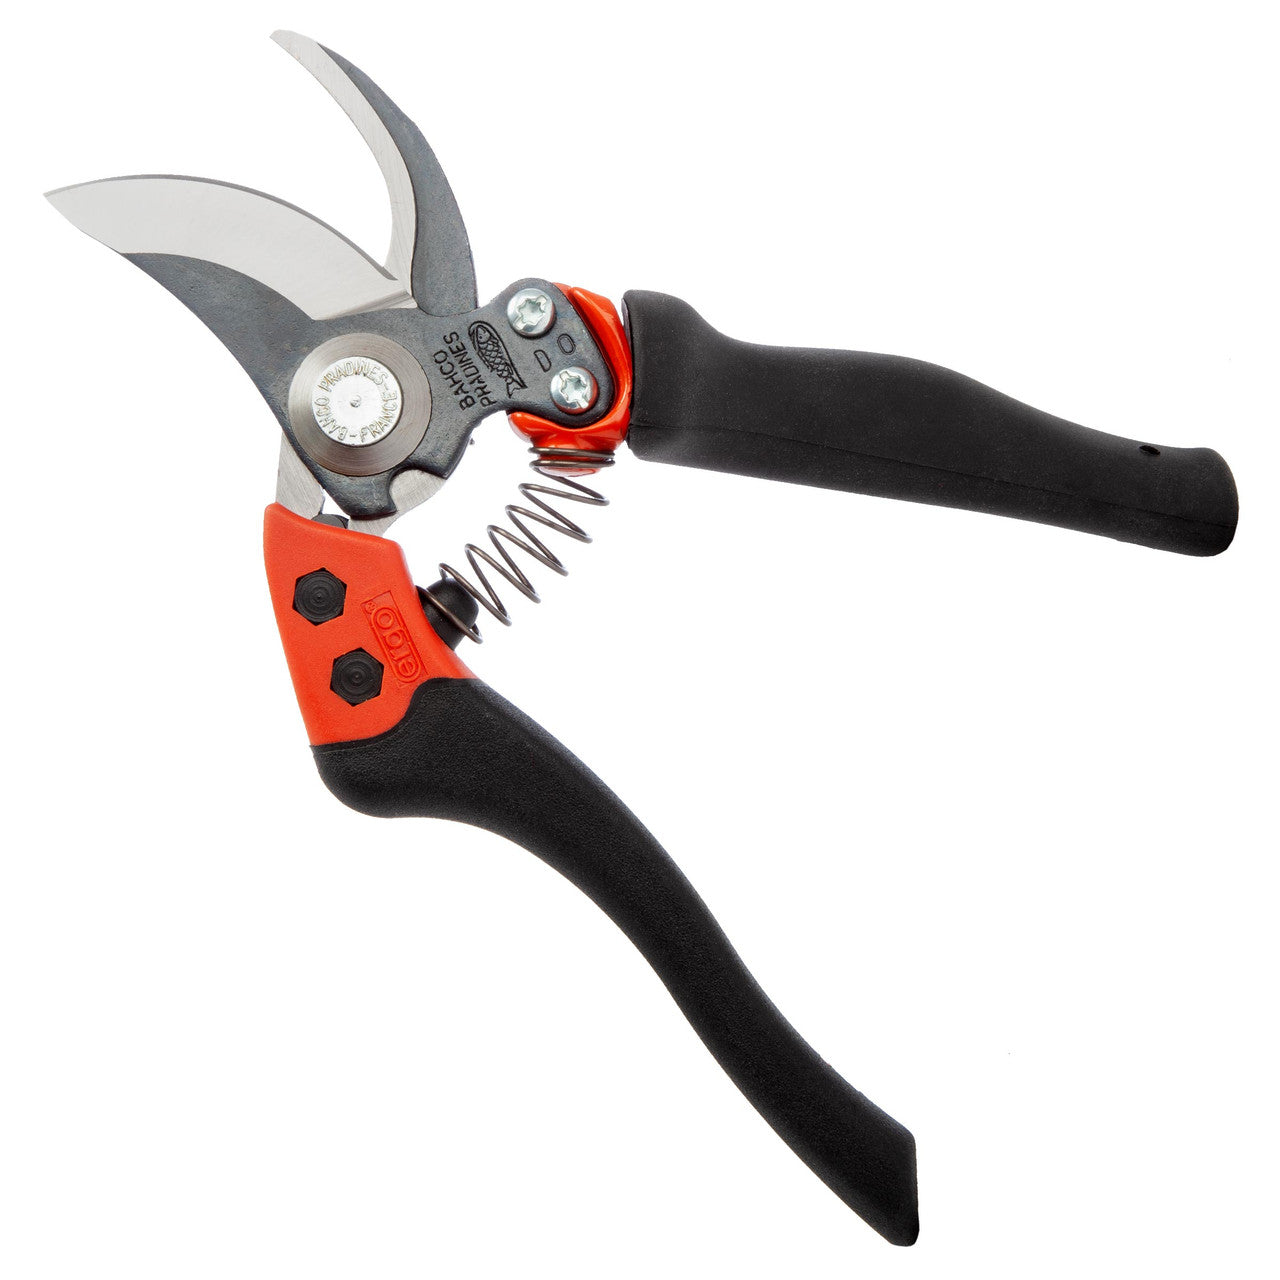 Bahco PXR-M2 Bypass Secateurs with Rotating Handle Medium 20mm Capacity